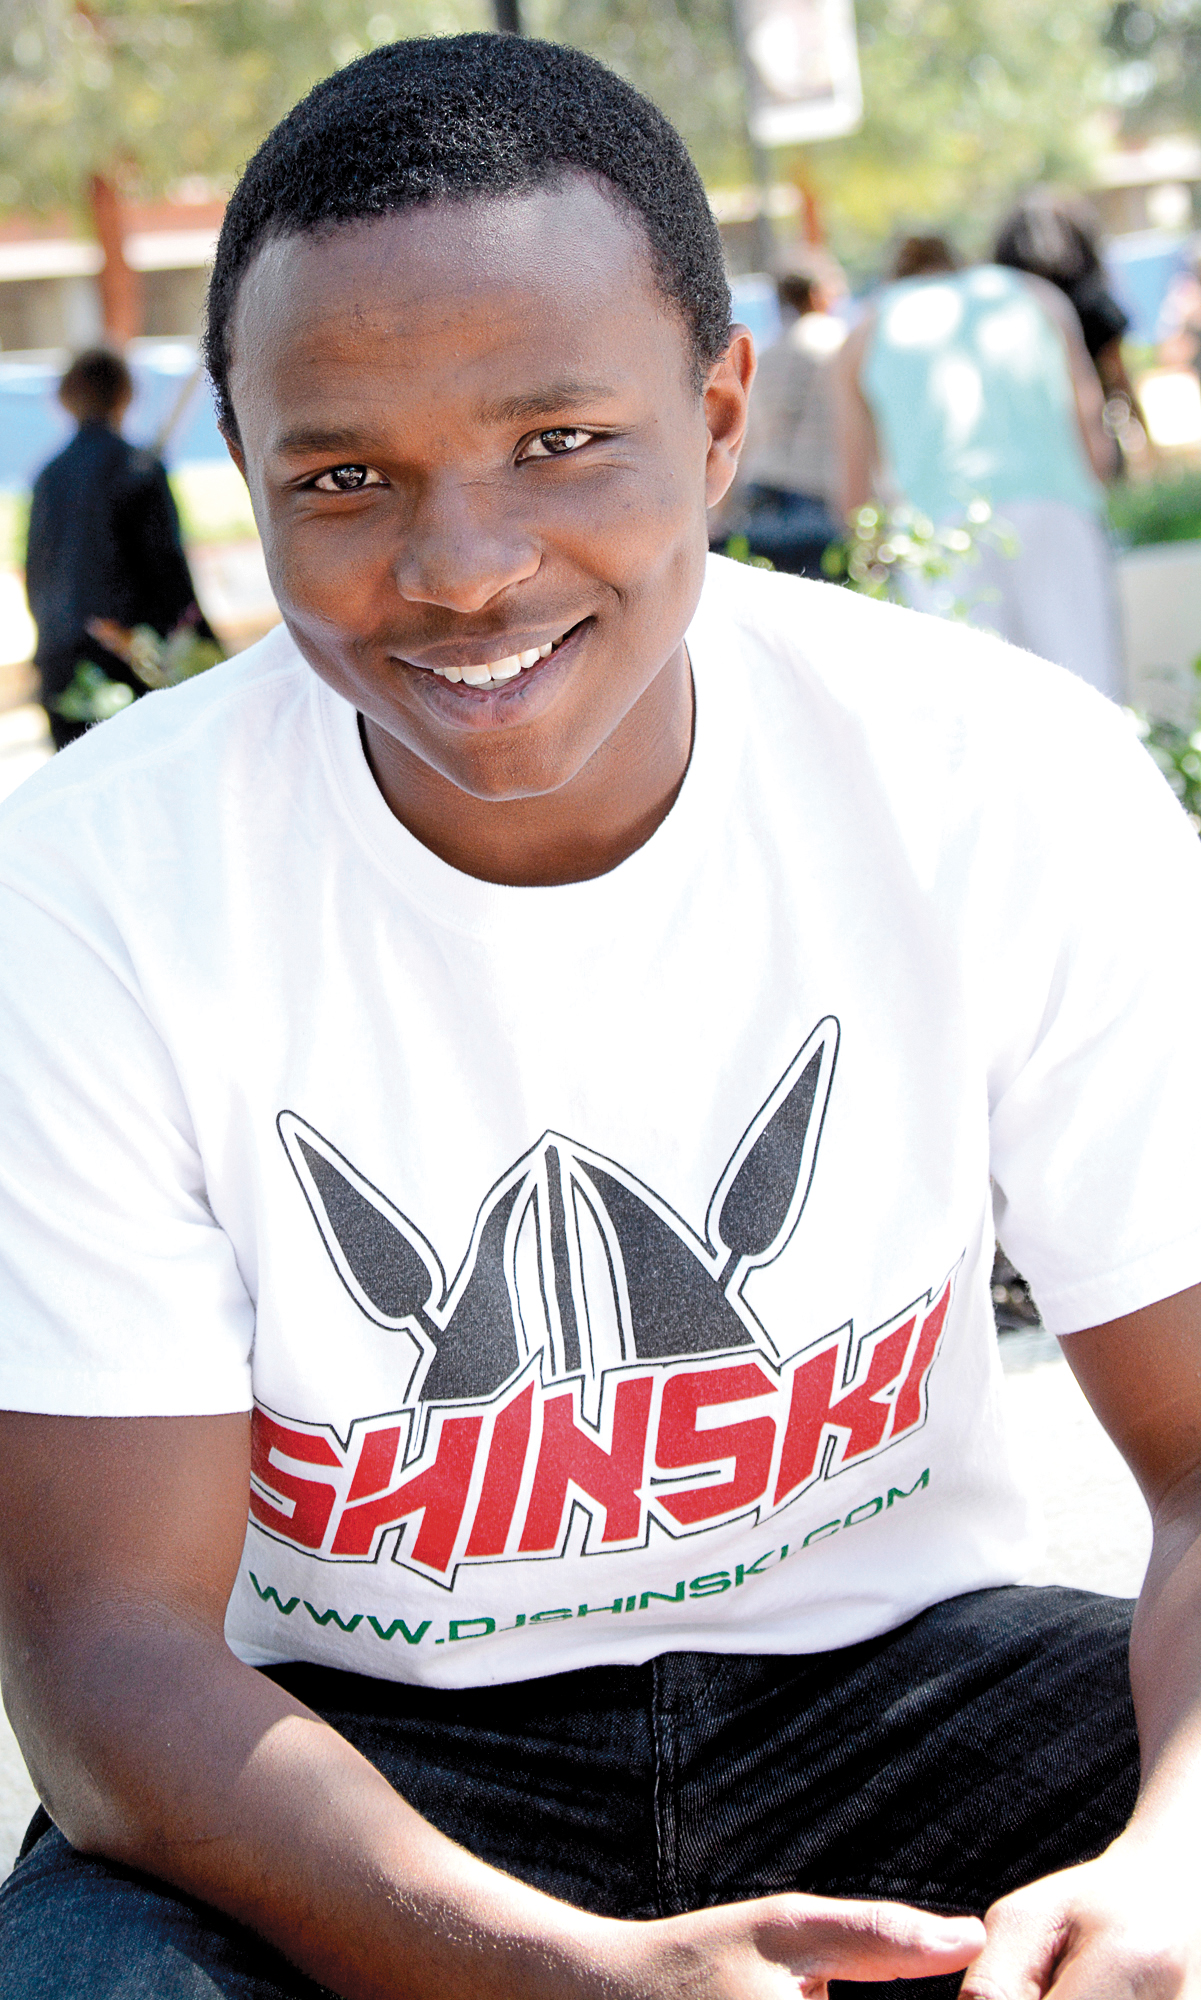 Kenyan native brings his rugby skills to L.A.